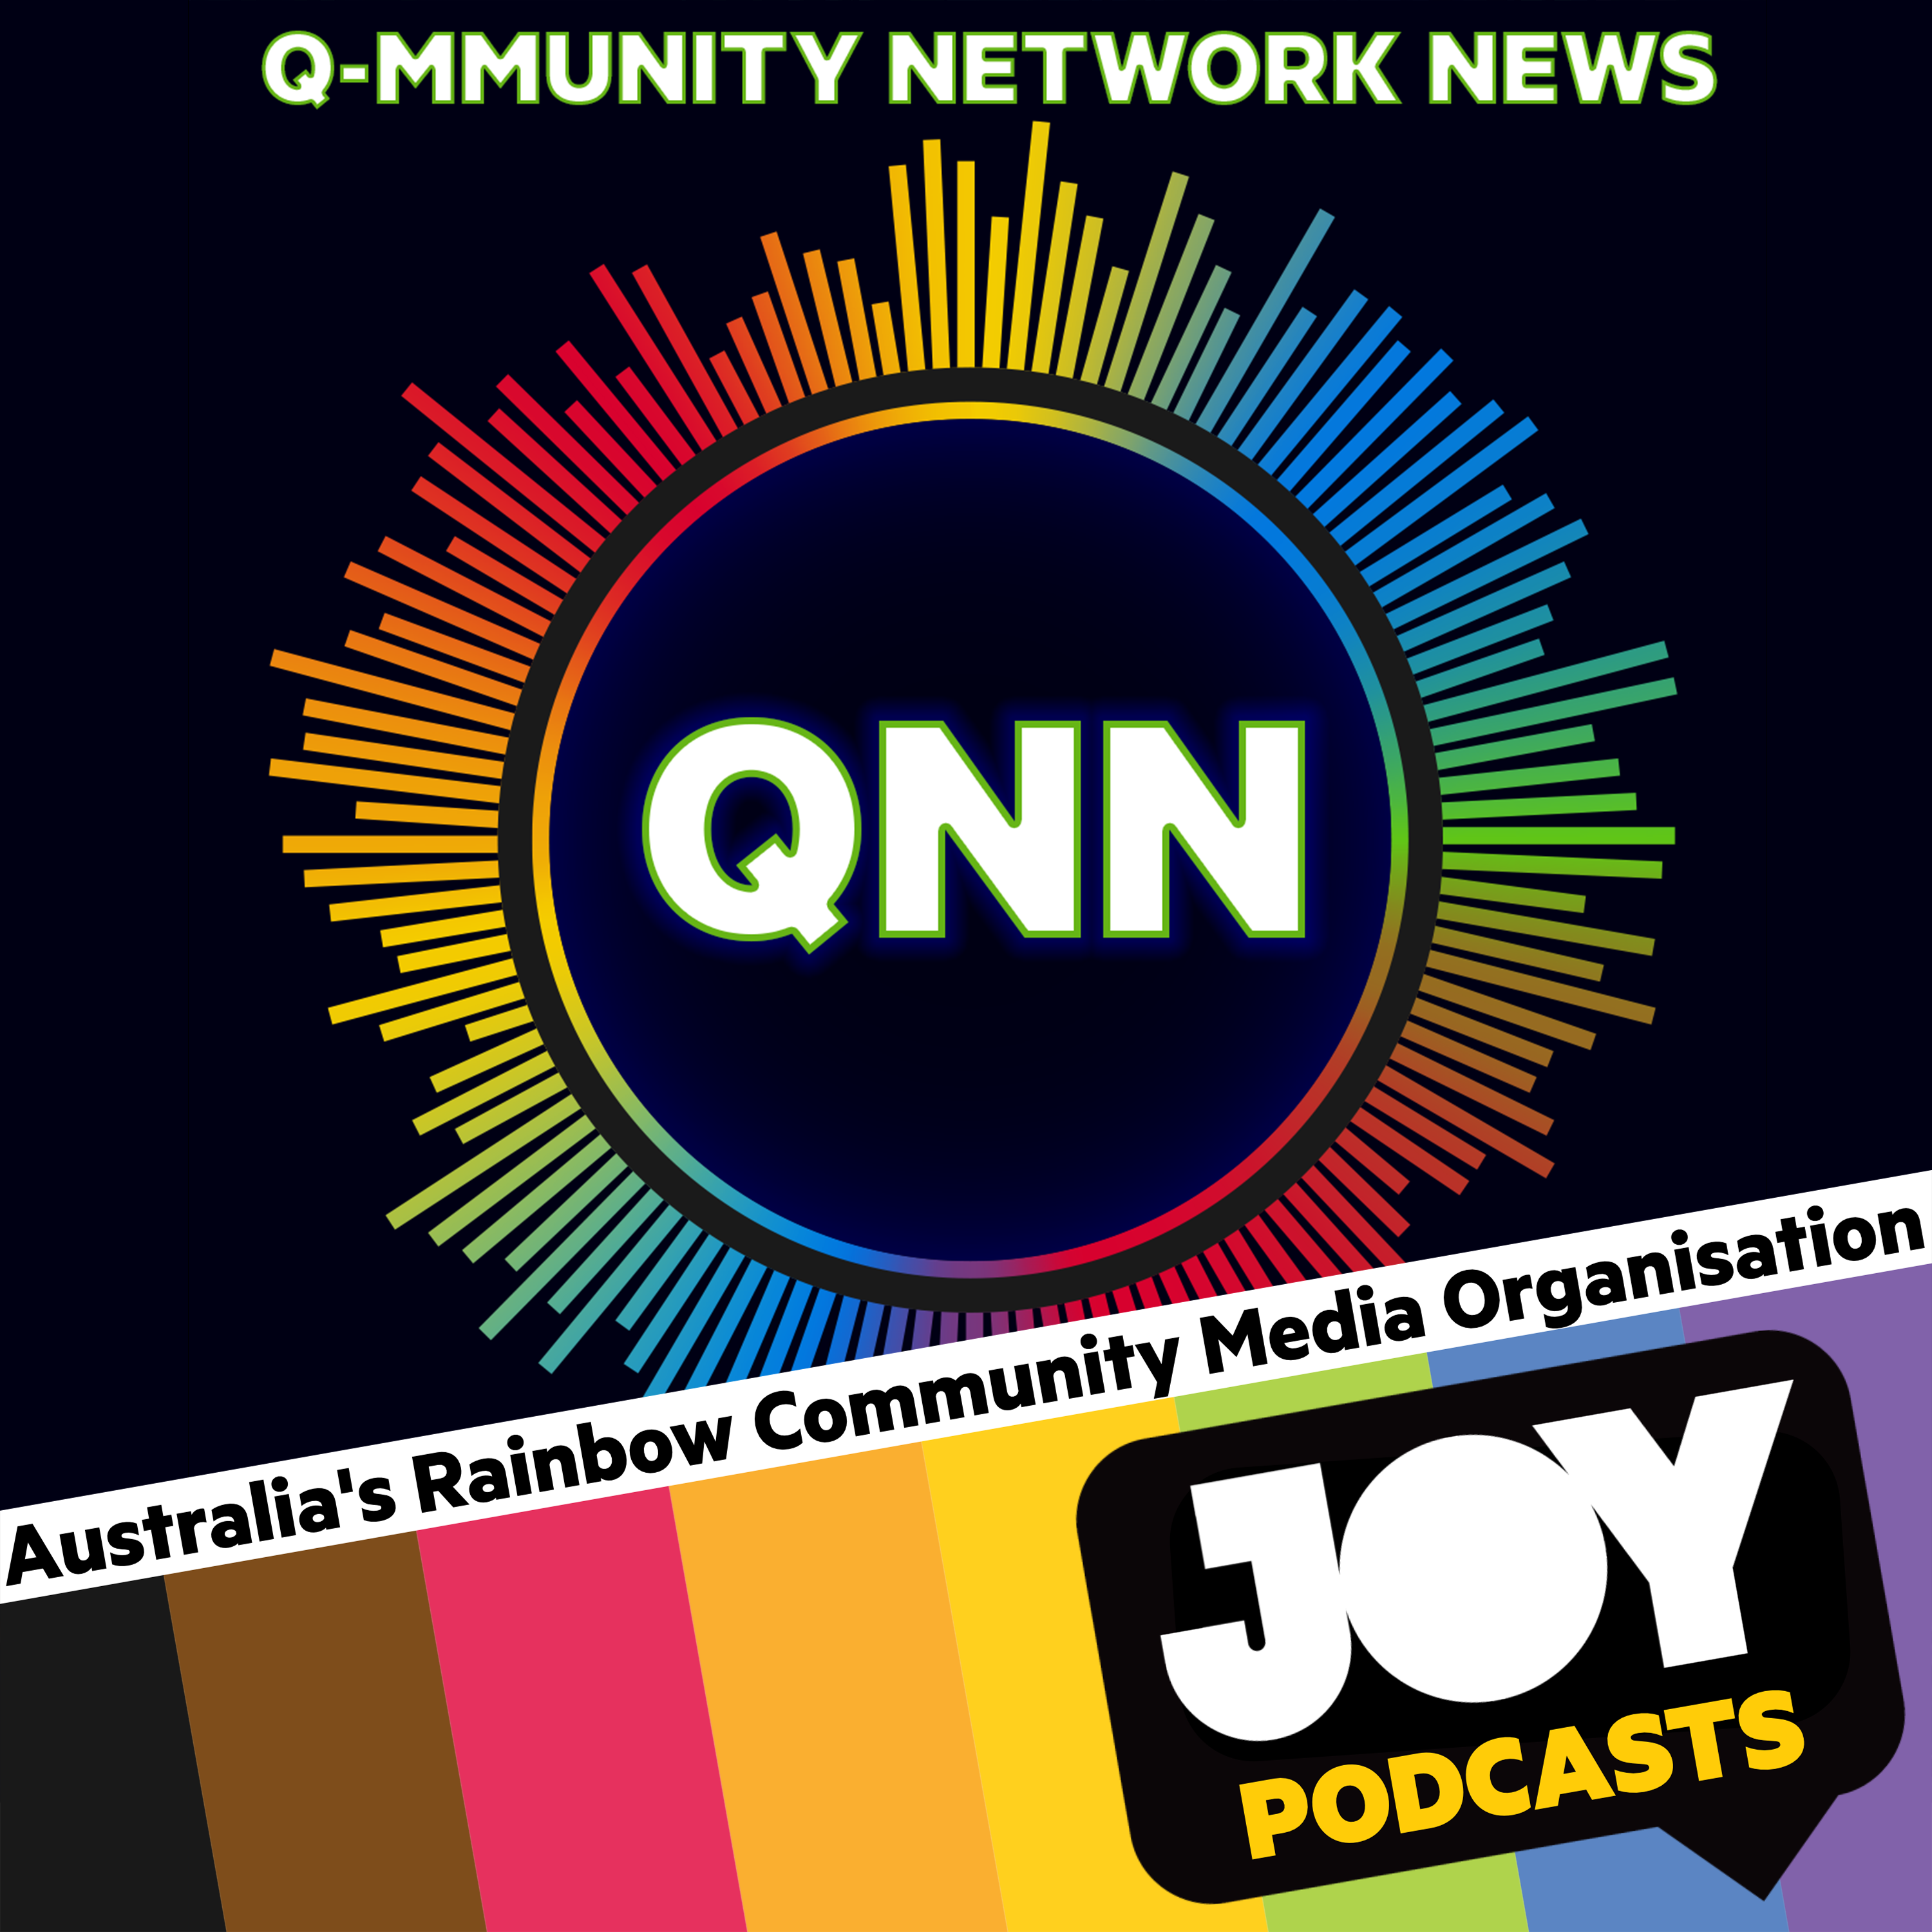 Q-mmunity Network New (QNN) – weekly queer news and sport